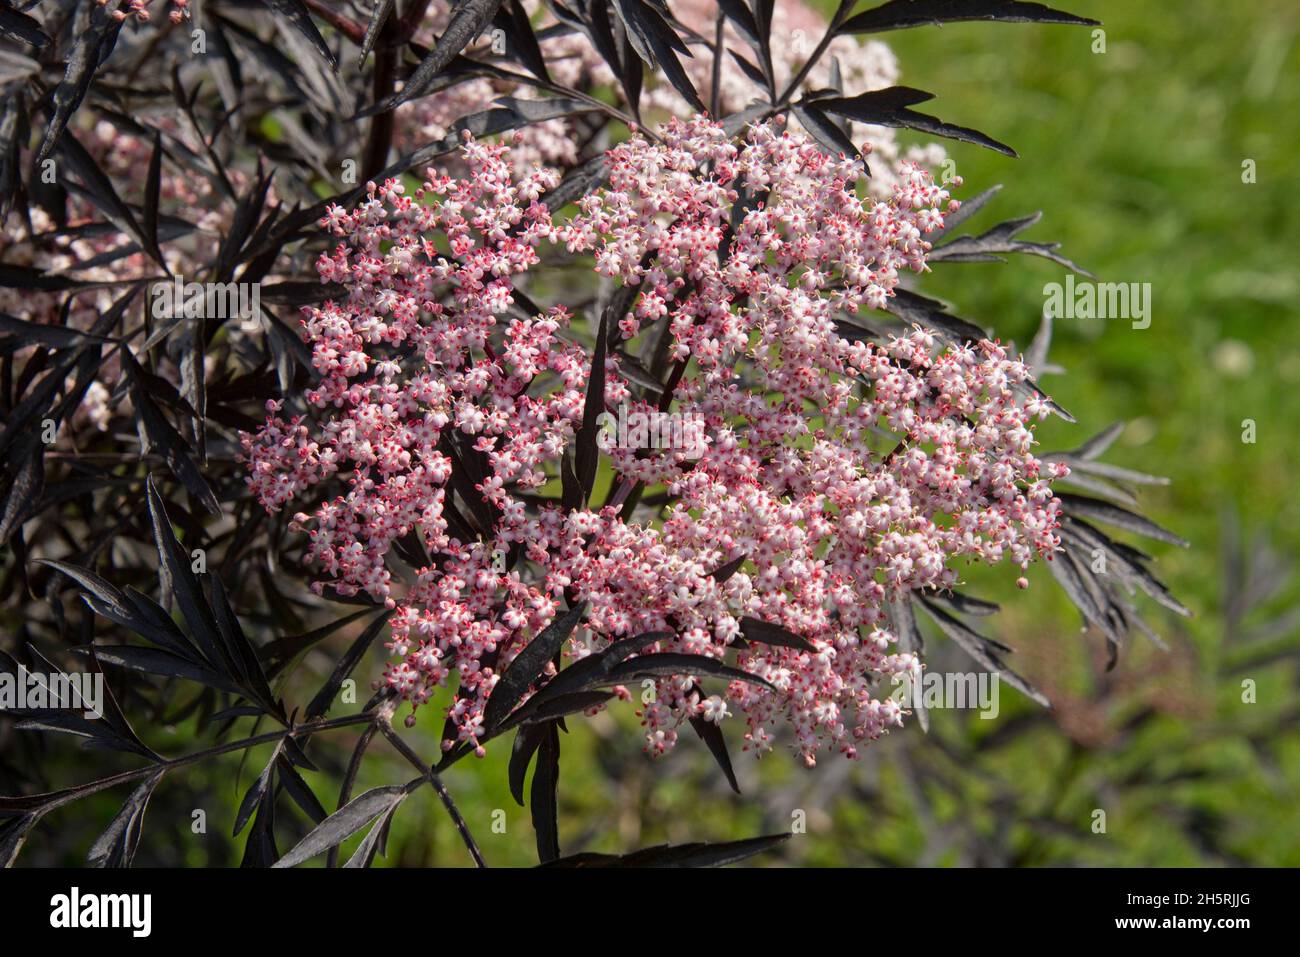 Sambucus nigra f.porphyrophylla 'Eva, an ornamental elder with dark purple deeply dissected leaves and pink and red flowers on an umbel Stock Photo